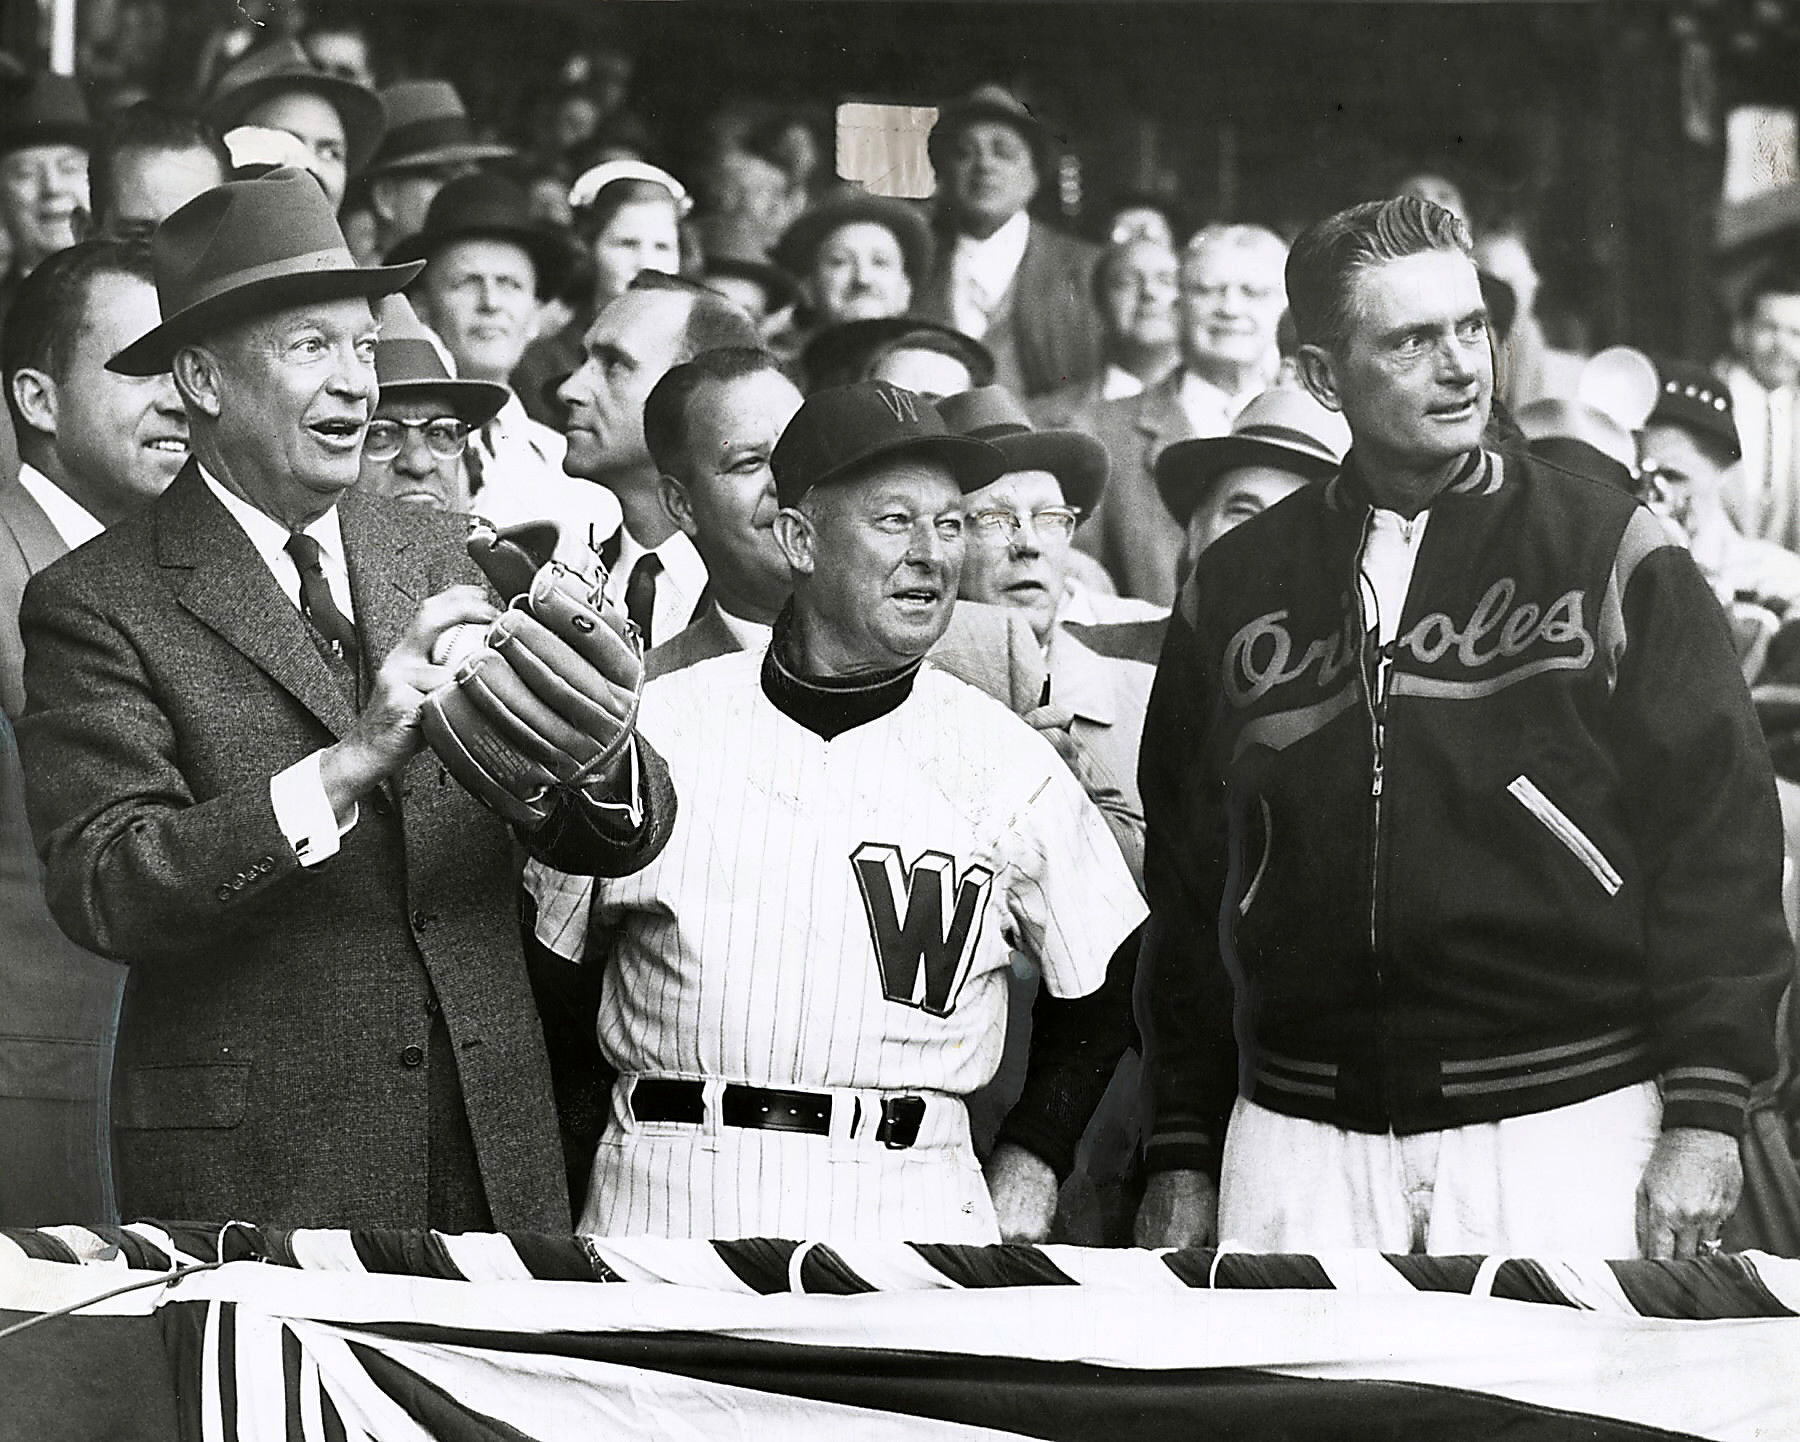 President Eisenhower throws out the first pitch at the 1957's opening day baseball game between the Baltimore Orioles and the Washington Senators as Managers Chuck Dressen (Washington) and Paul Richards (Orioles) watch.